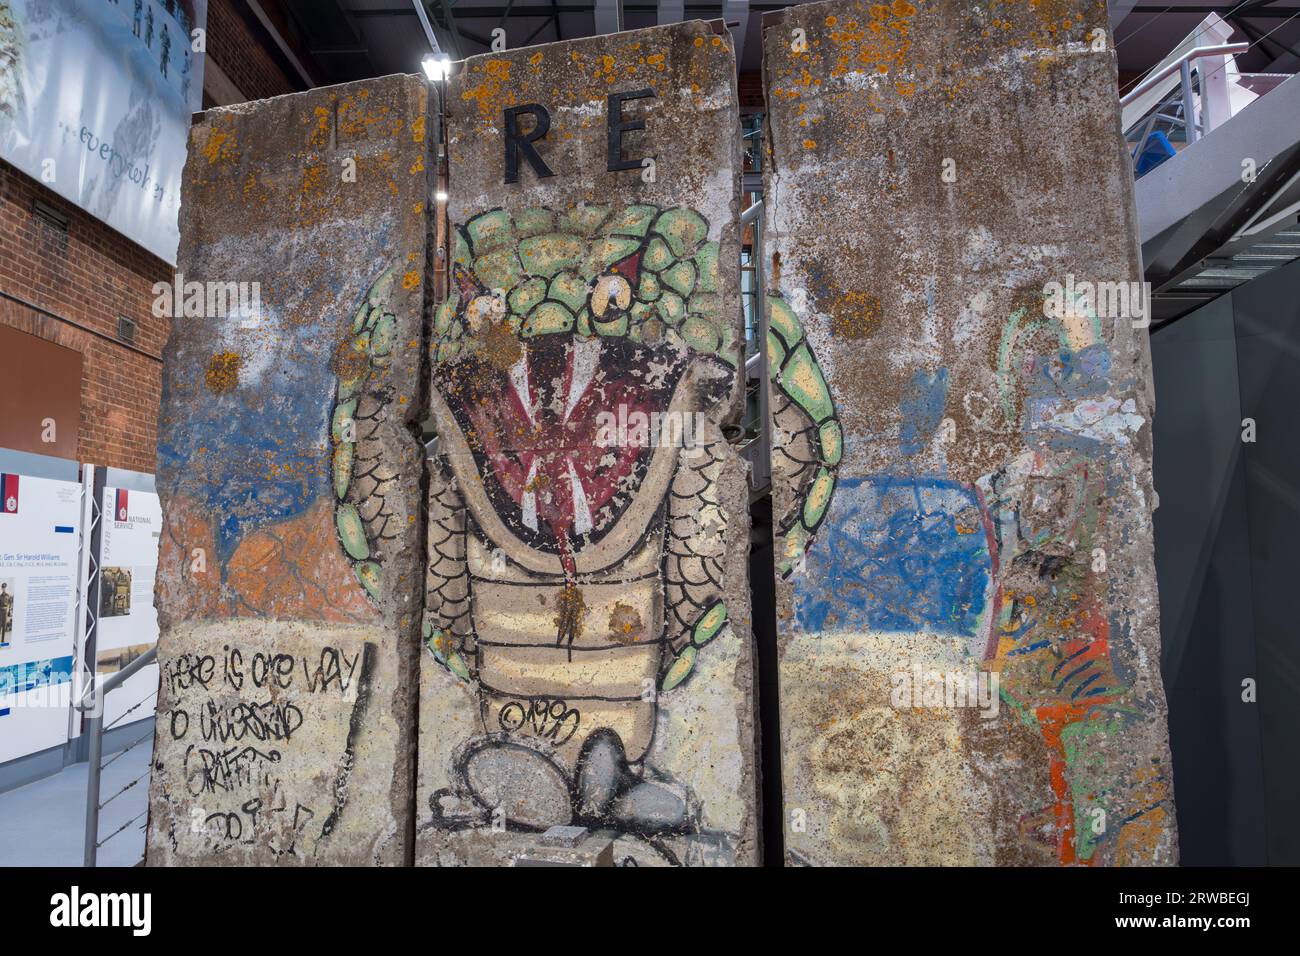 Three graffitied sections of the Berlin Wall on display in the Royal Engineers Museum in Gillingham, Kent, UK. Stock Photo